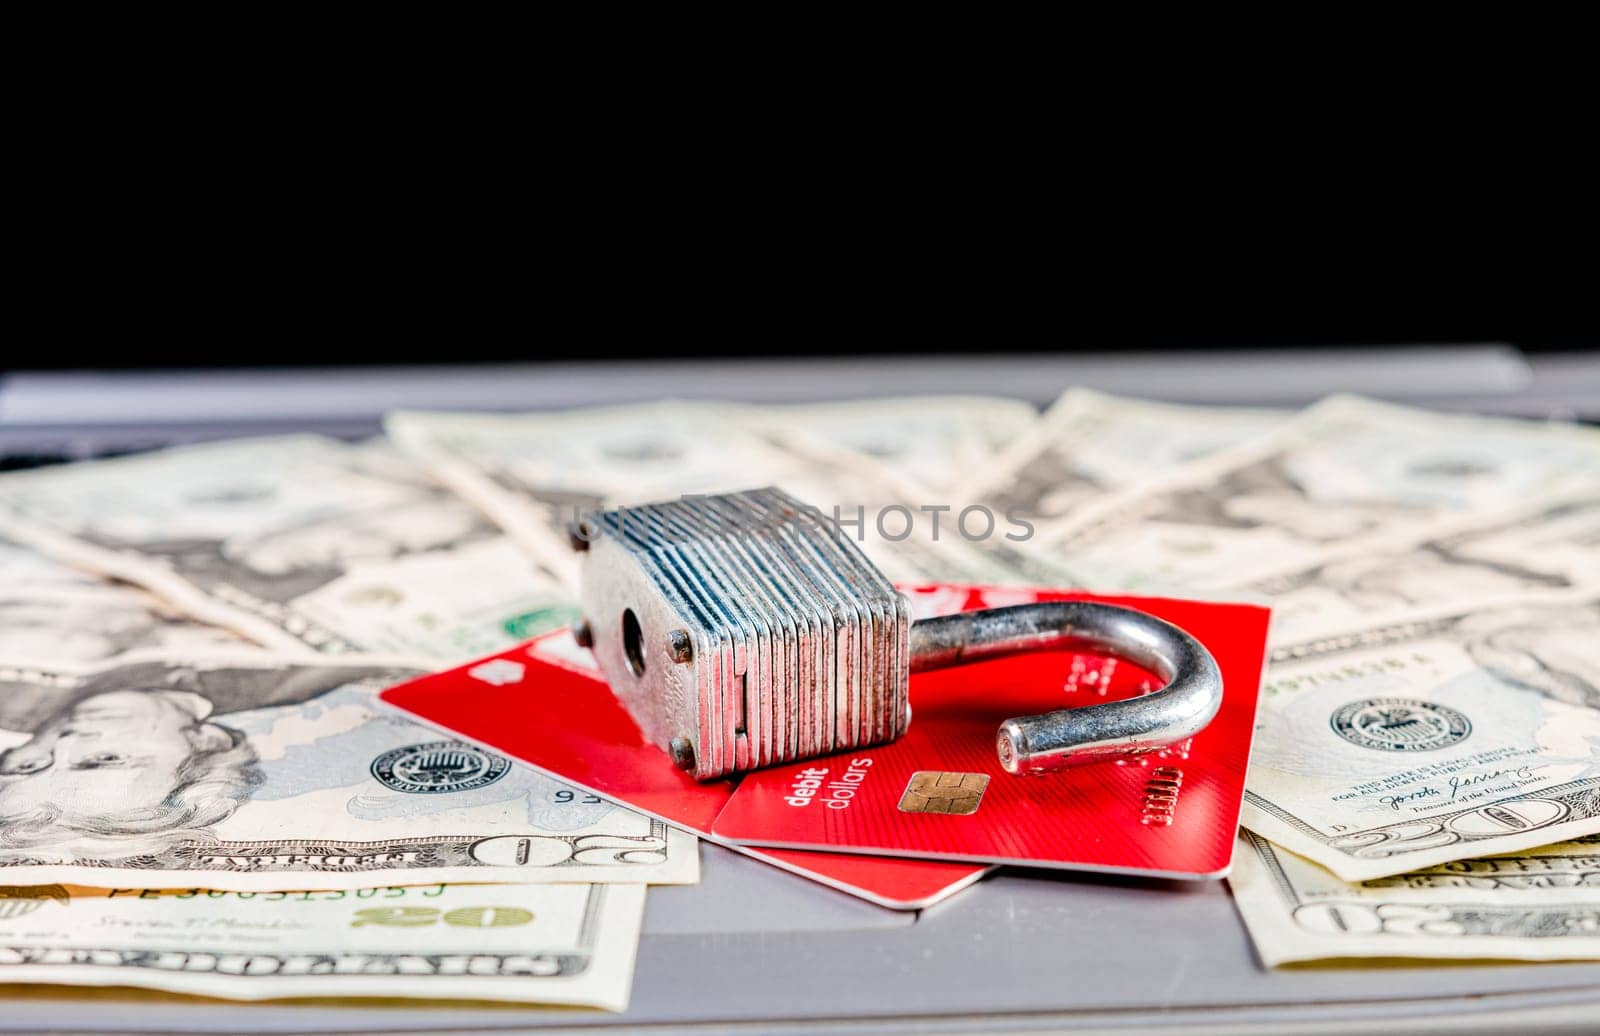 Padlock with credit card on top of dollars. Padlock on top of credit card on dollar bills, Concept of credit card information theft